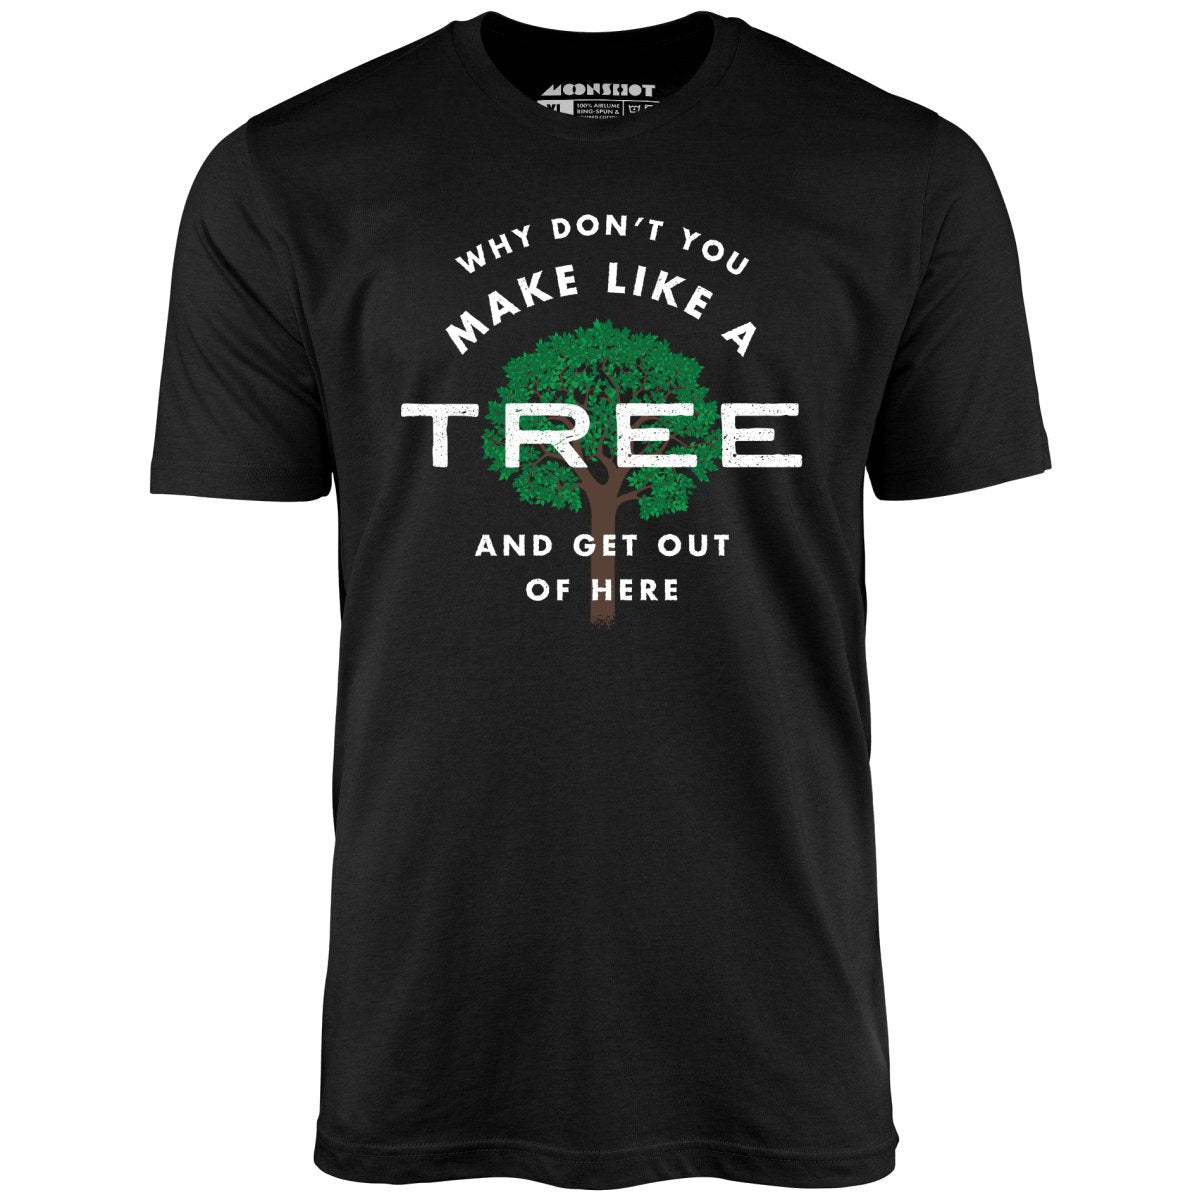 Why Don't You Make Like a Tree and Get Out of Here - Unisex T-Shirt